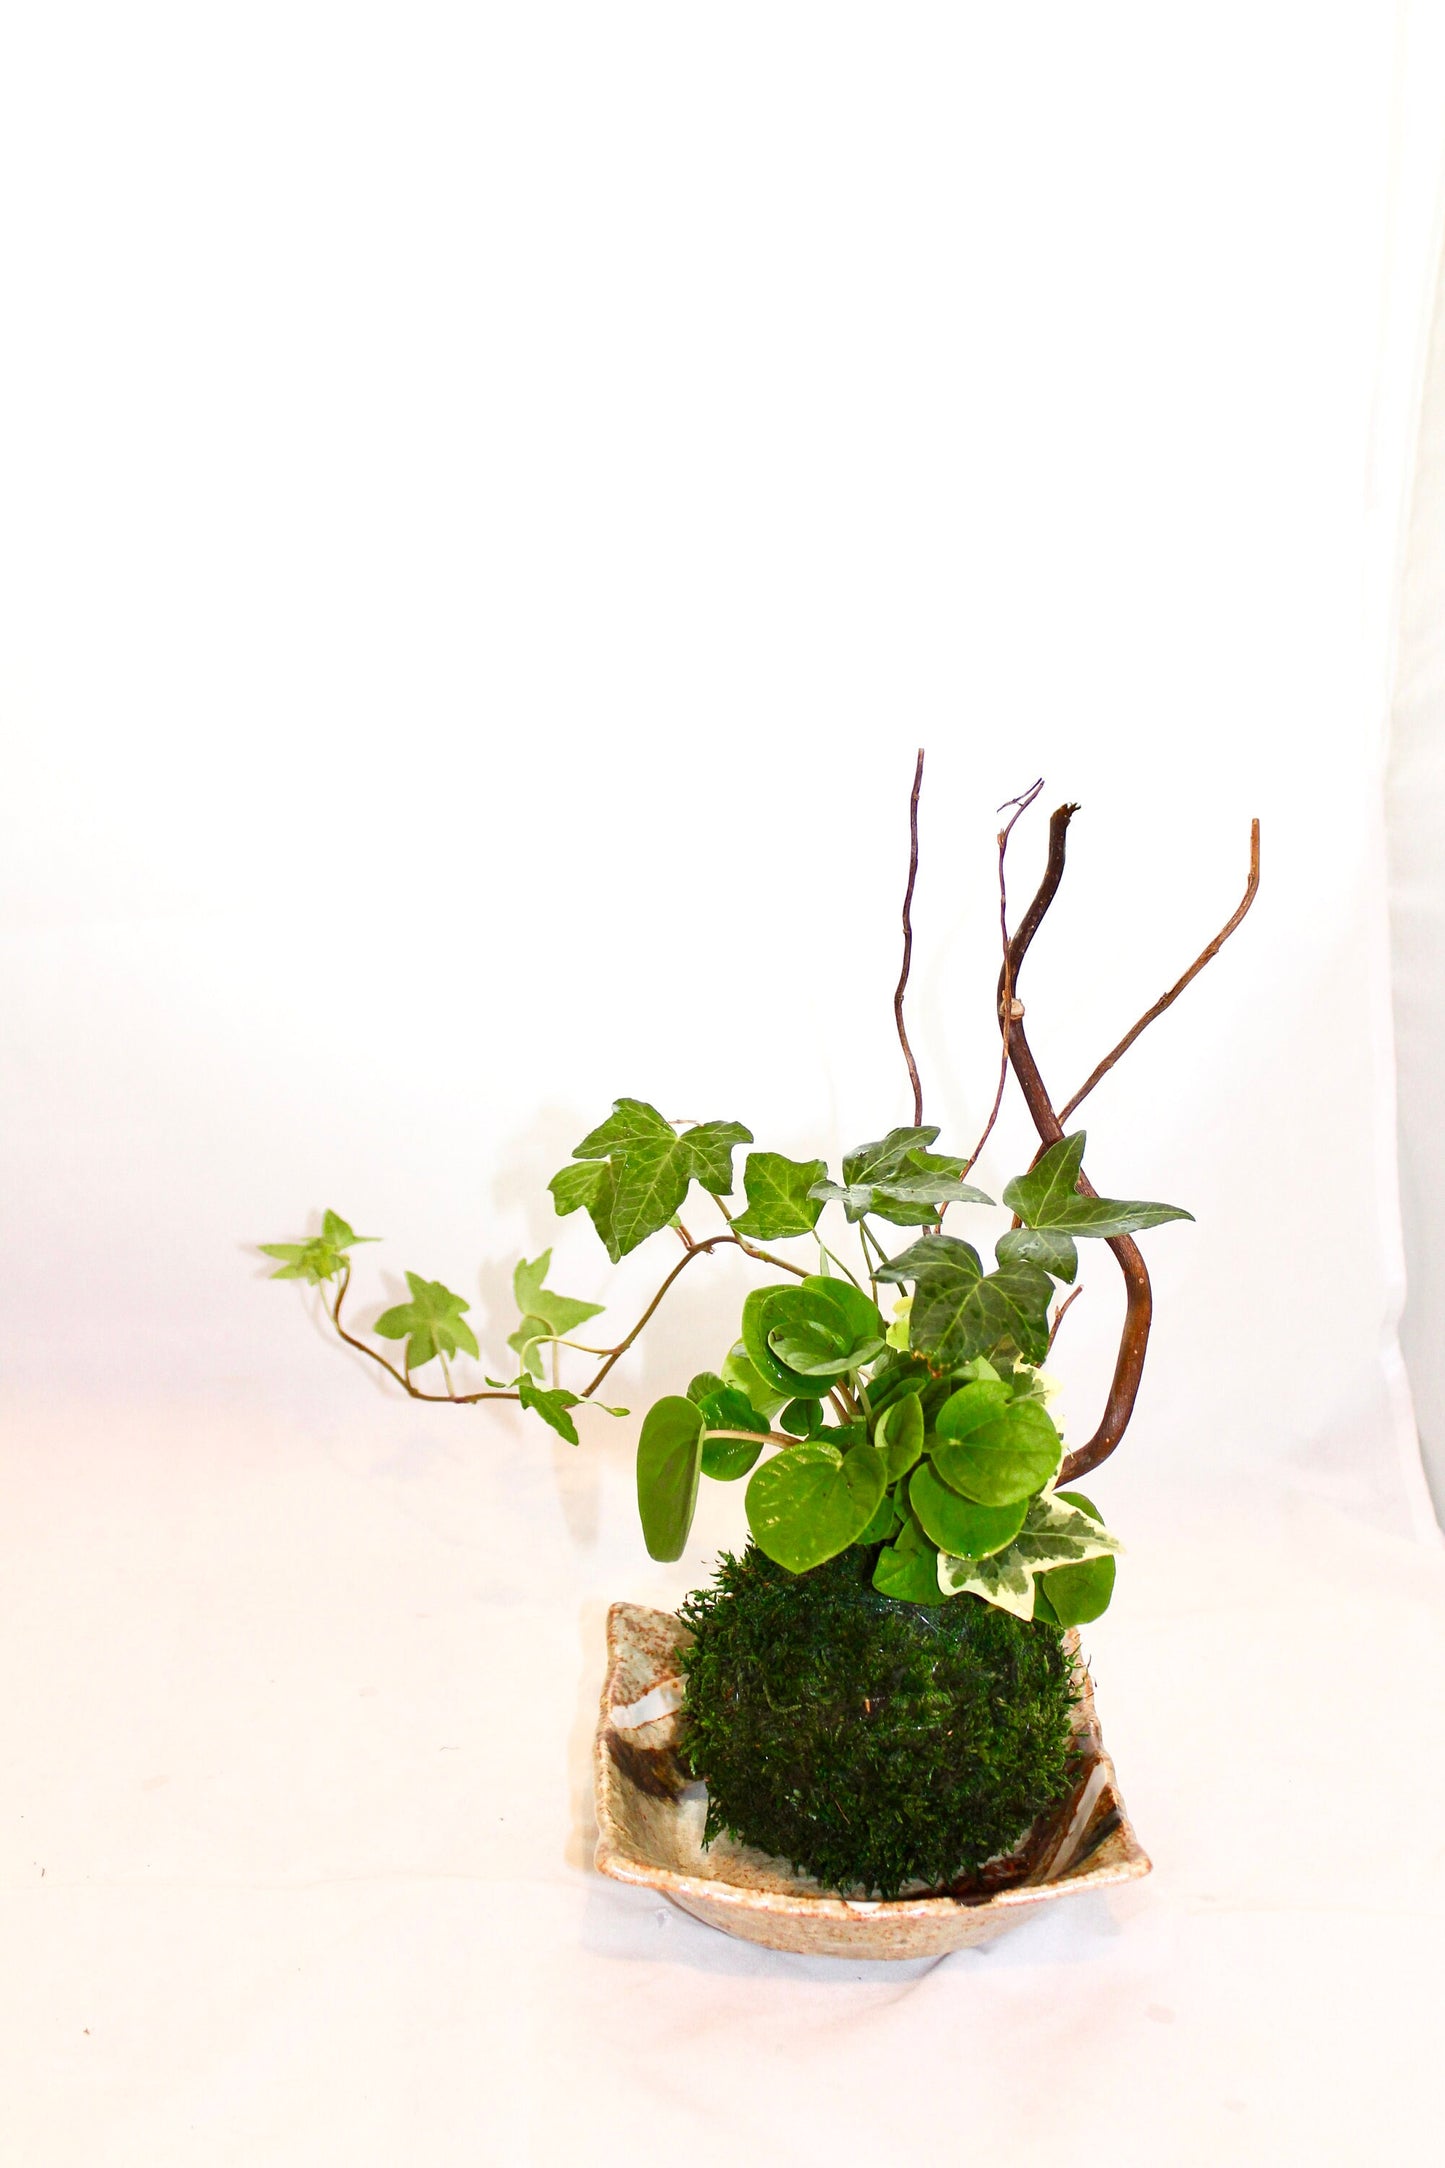 Arranged Kokedama with ripple peperomia and ivy, Japanese traditional indoor moss ball garden